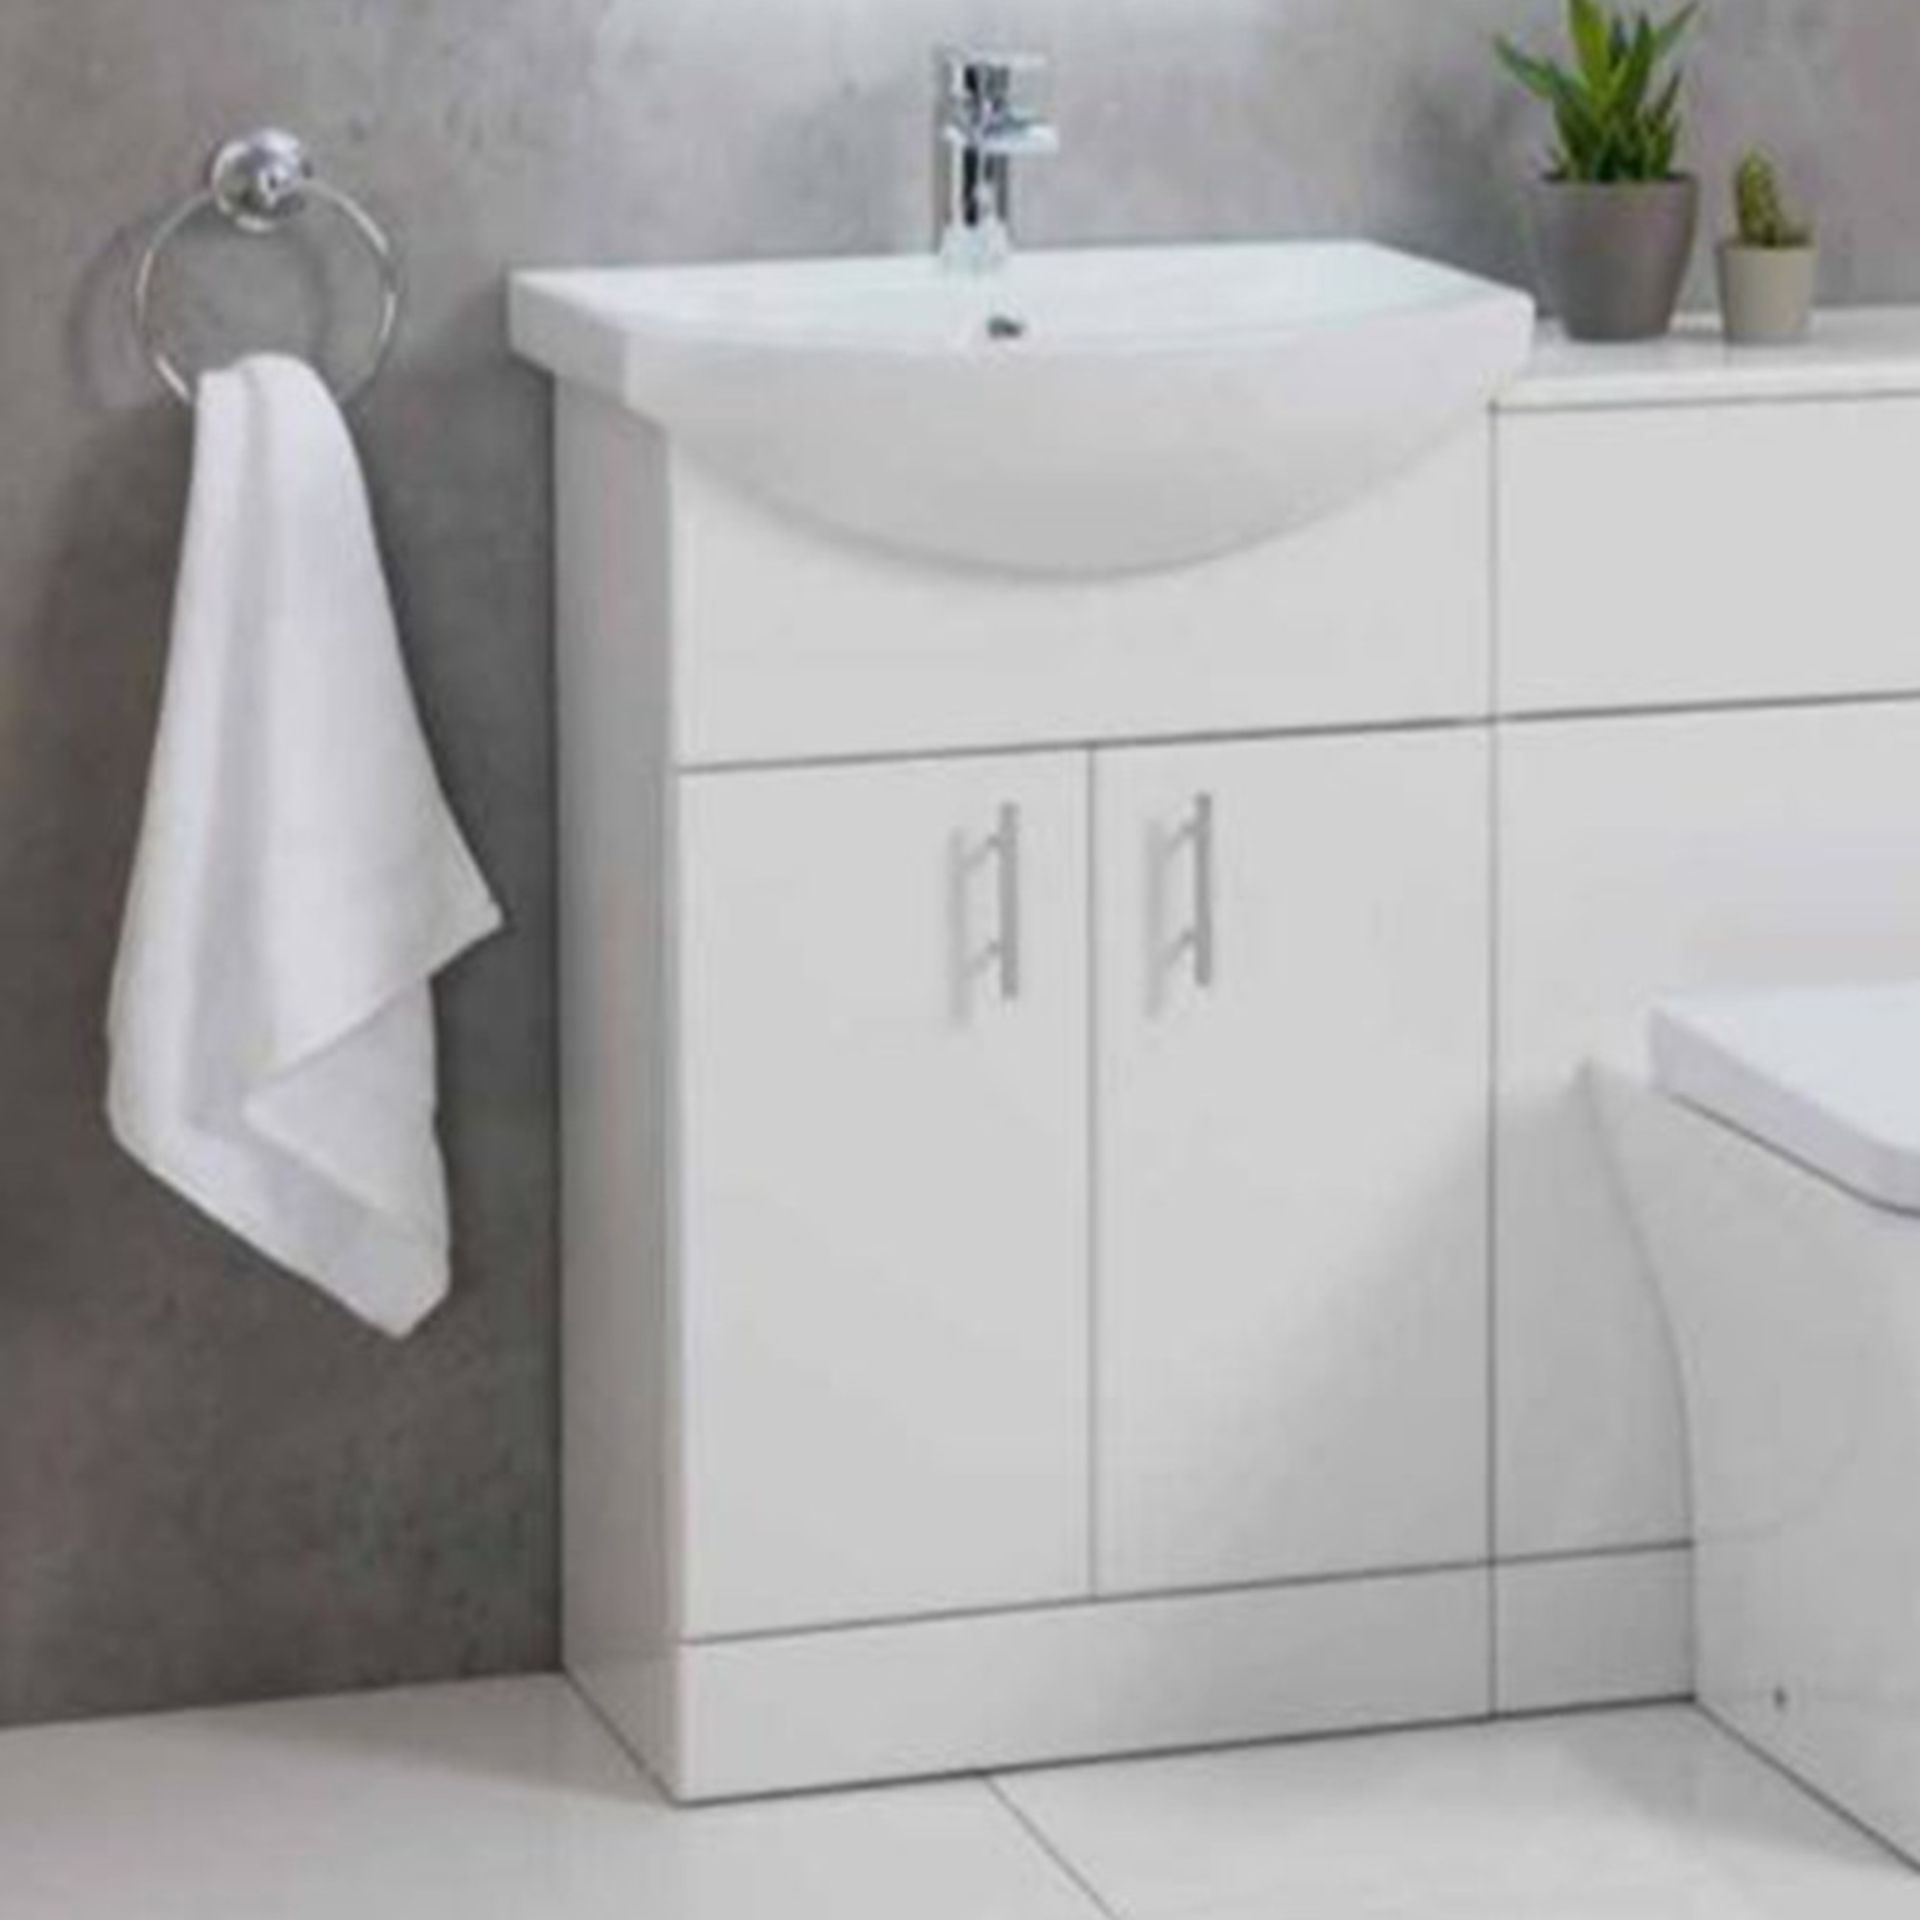 New (A71) Lanza 550mm Vanity Unit. RRP £403.99. Comes Complete With Basin. New (A71) Lanza   New (